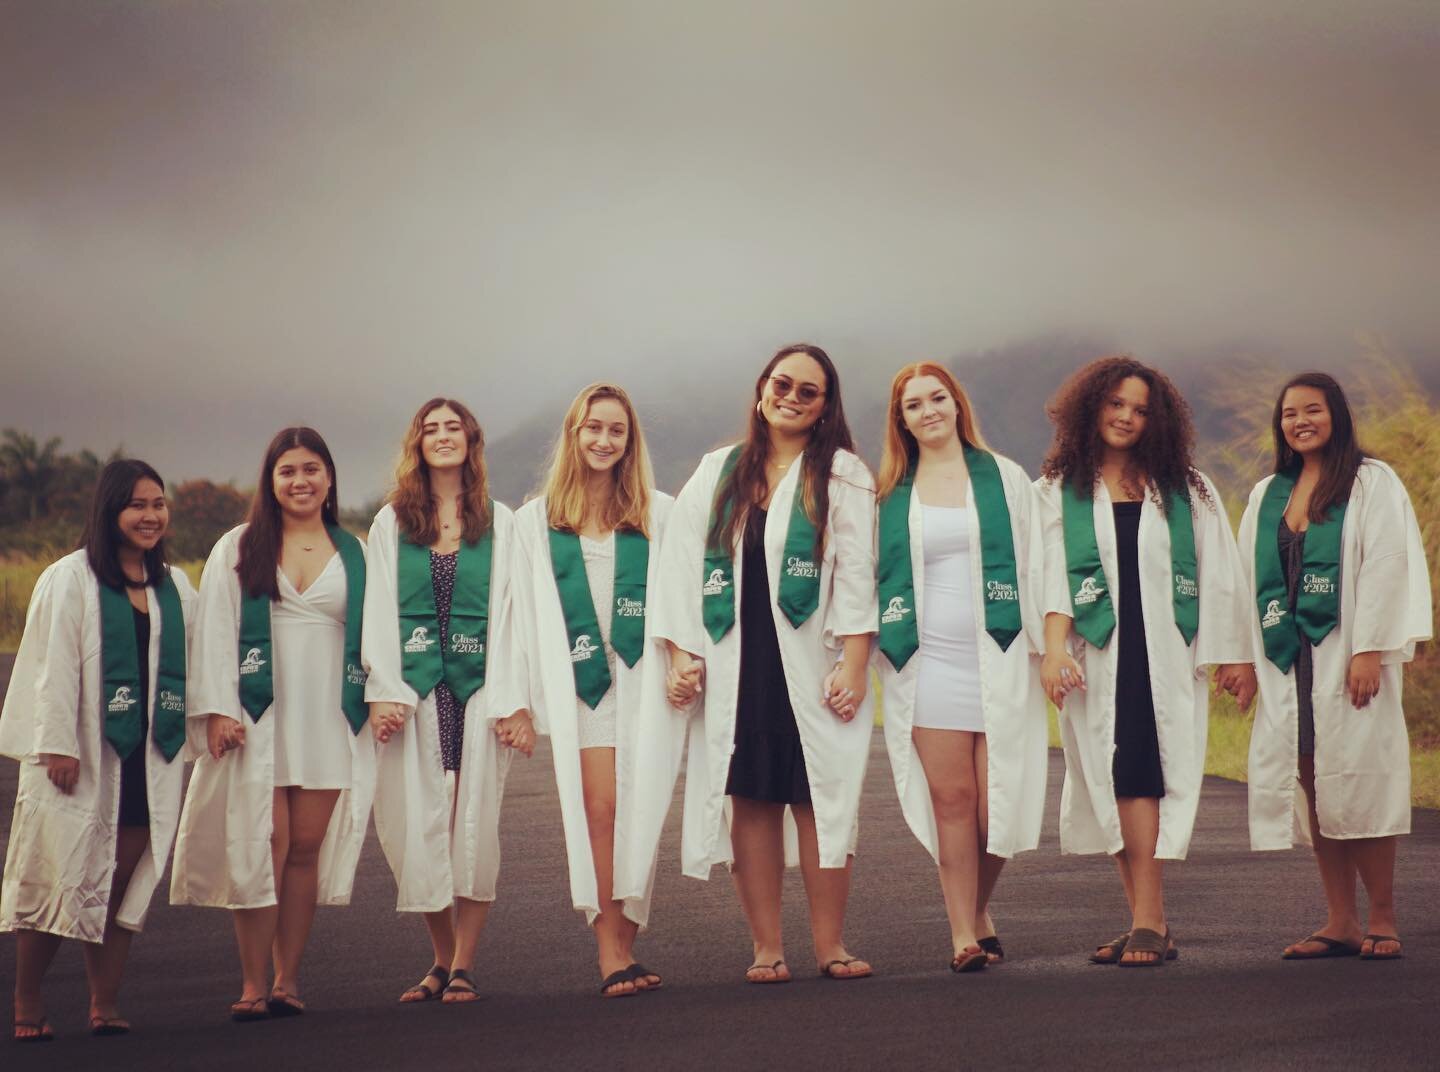 Class of 2021👏👏👏👏
Talk about rising! These young ladies are the definition of Wahine Rising to me🌈

I have witnessed the importance of a solid, driven, and like minded peer group for both of my girls, especially academically. This has always bee